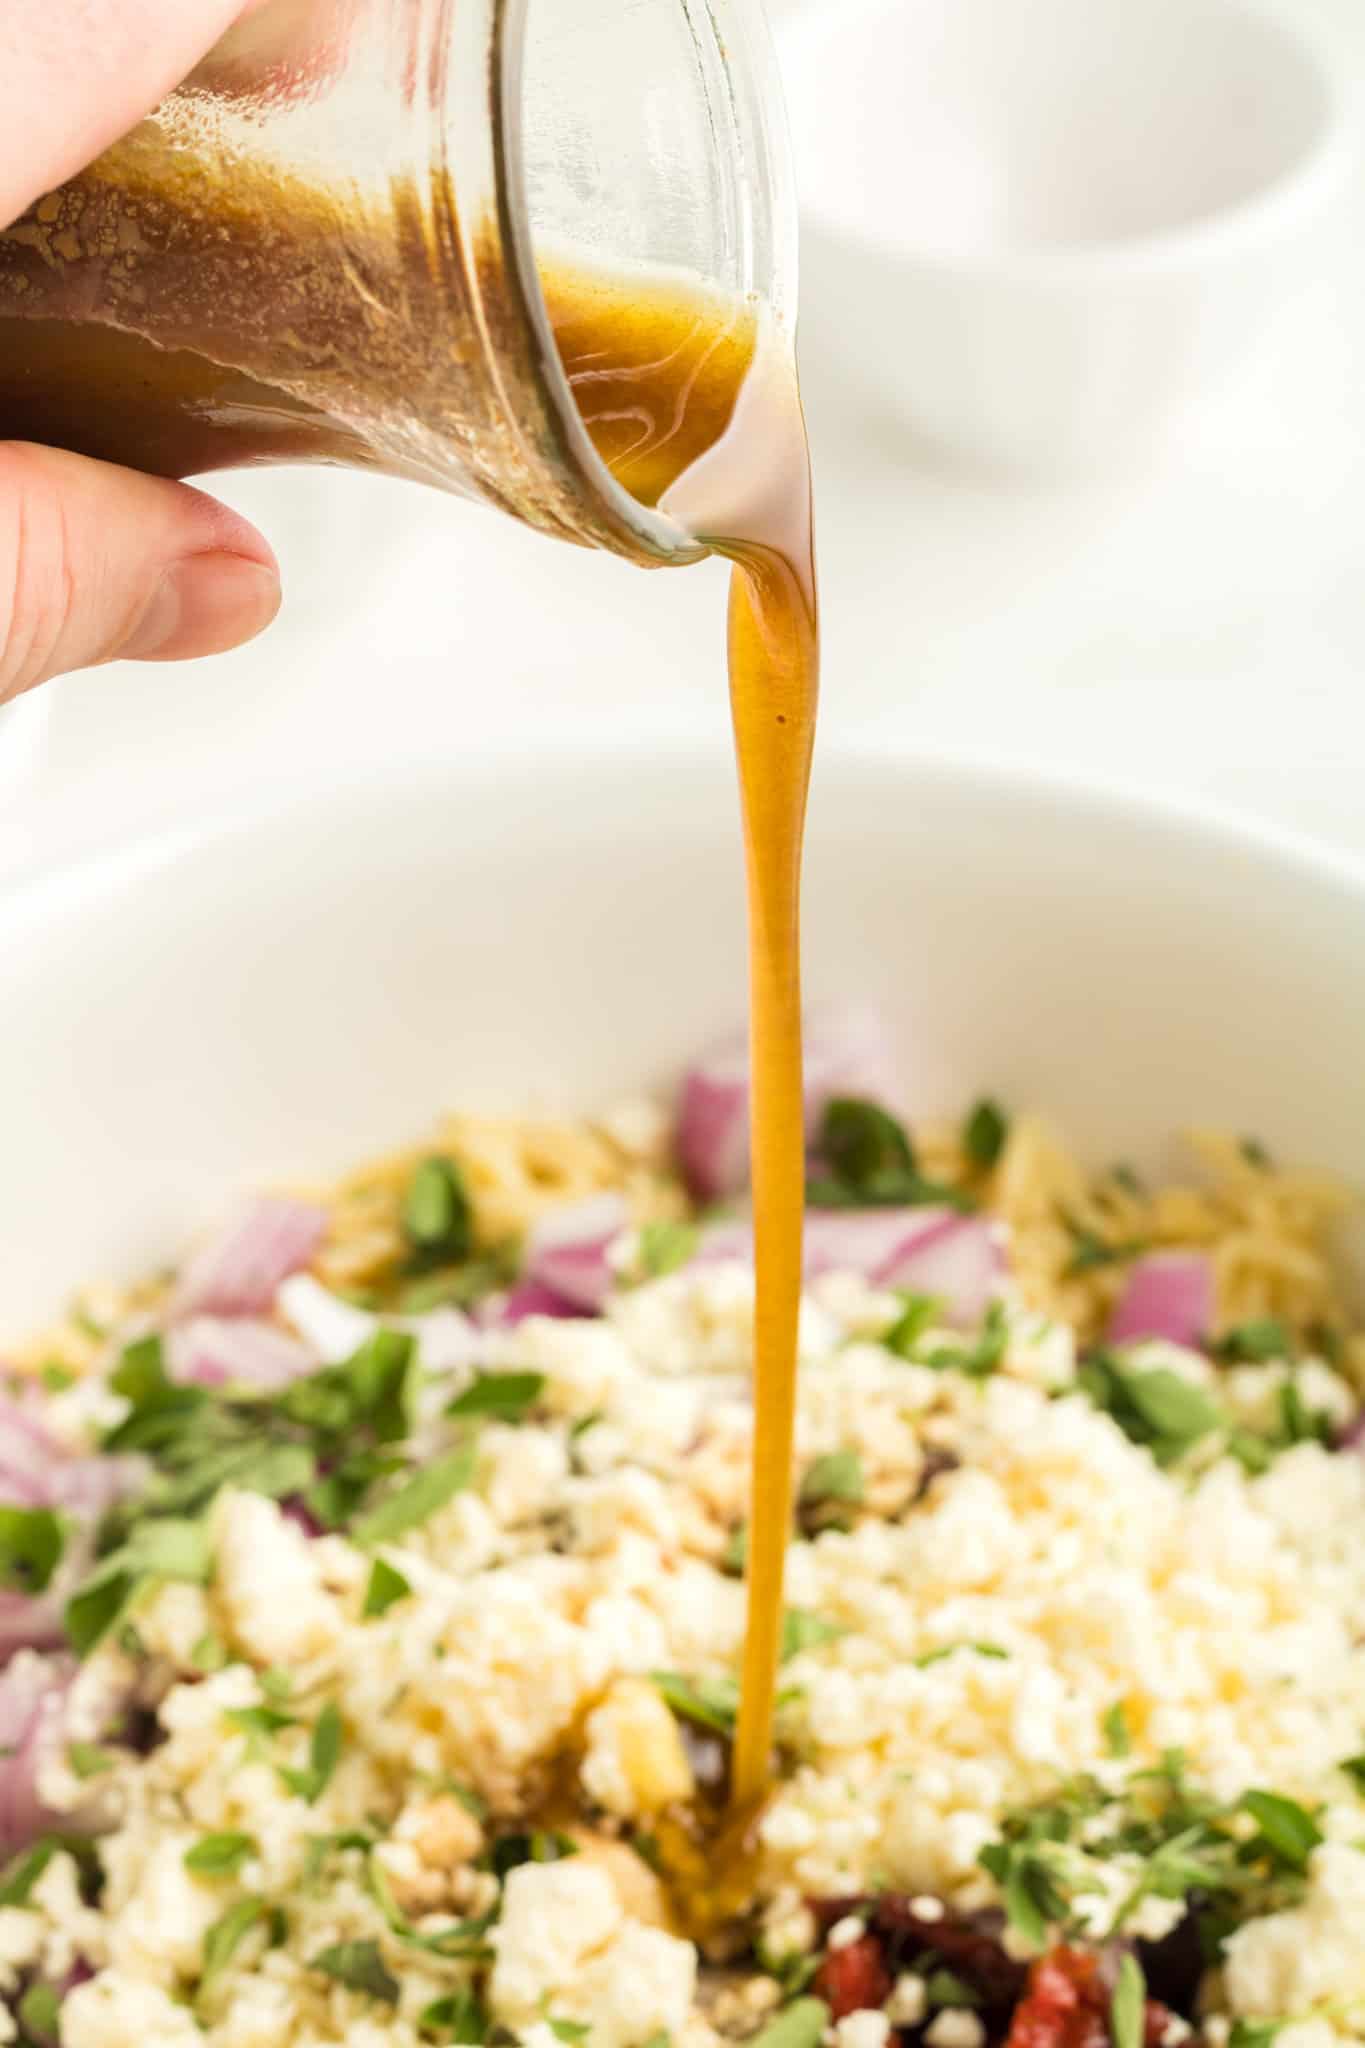 balsamic dressing being poured over feta and oregano orzo pasta salad